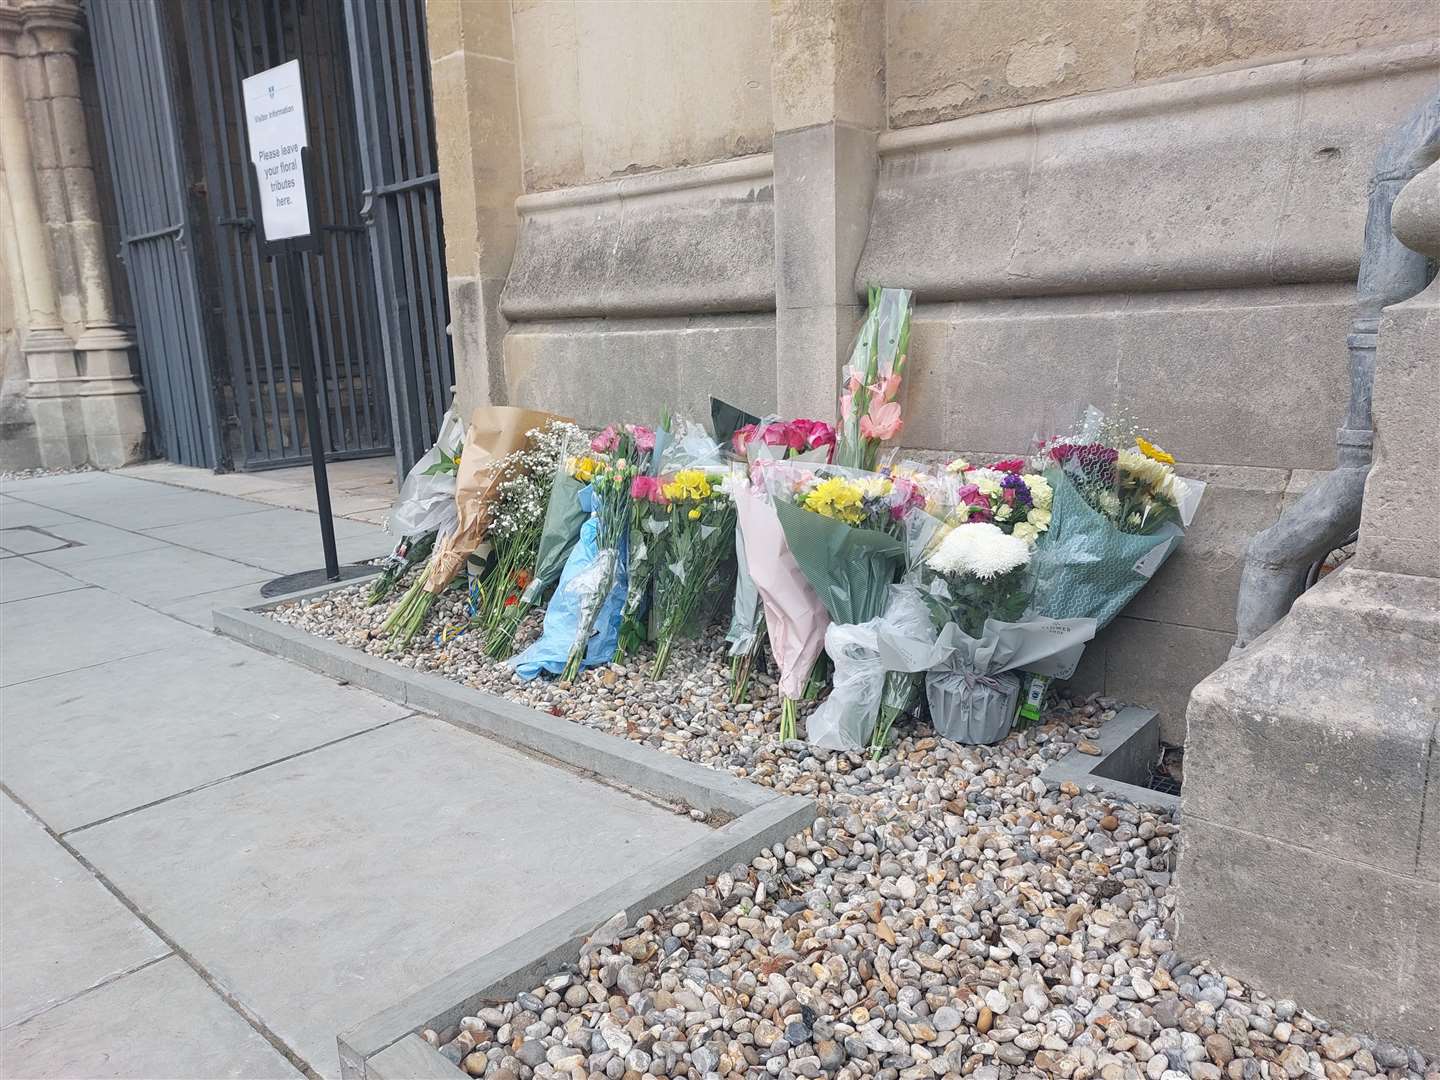 Floral tributes outside the Cathedral on Friday morning